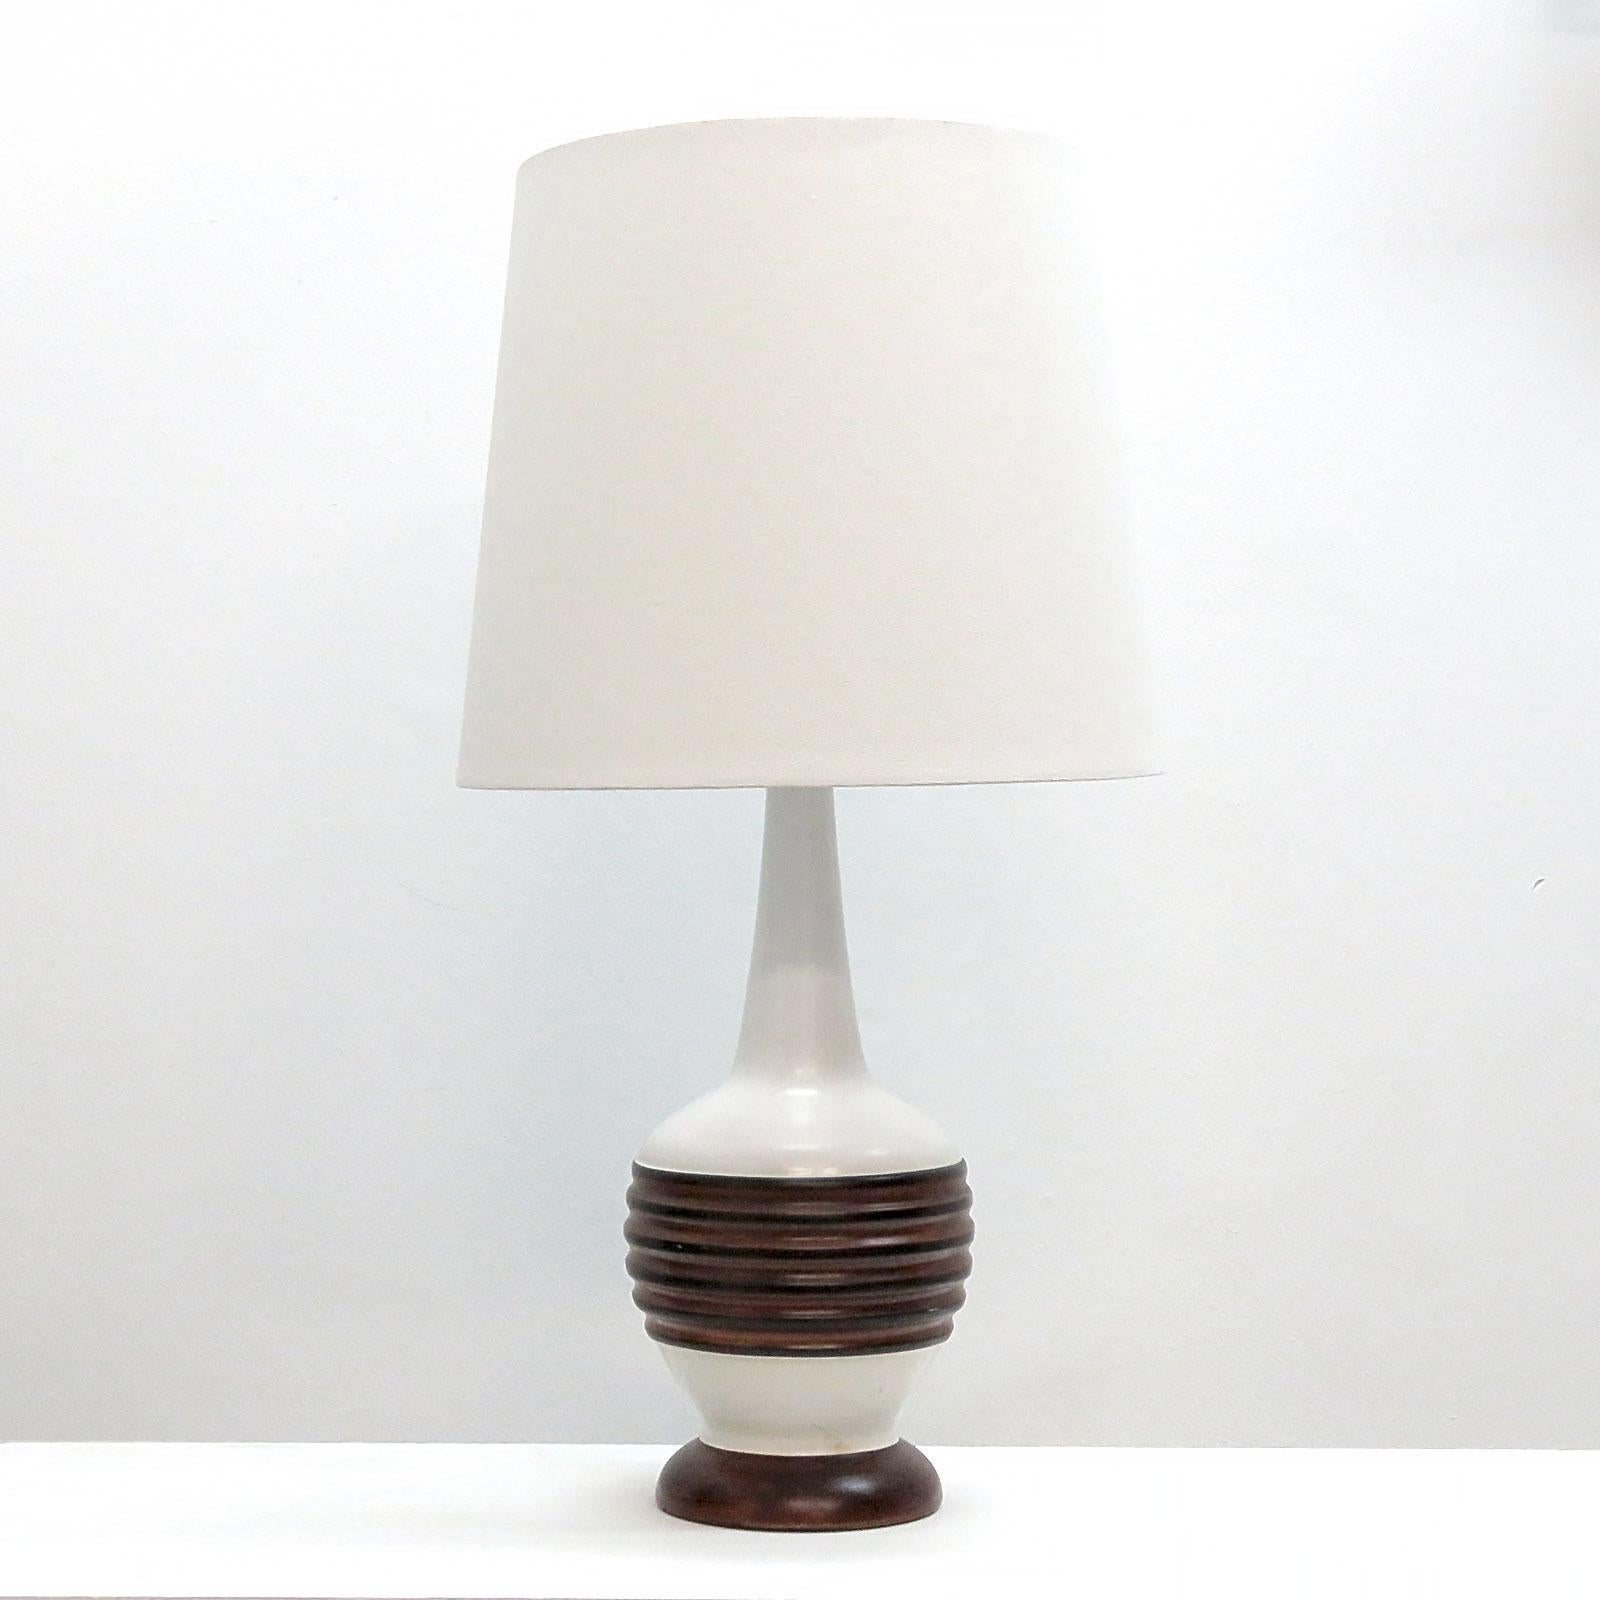 Wonderful tall 1960s ceramic table lamp with white and faux wood glaze, wired for US standards, one E26 socket, max. wattage 75w, bulb provided as a one time courtesy. 